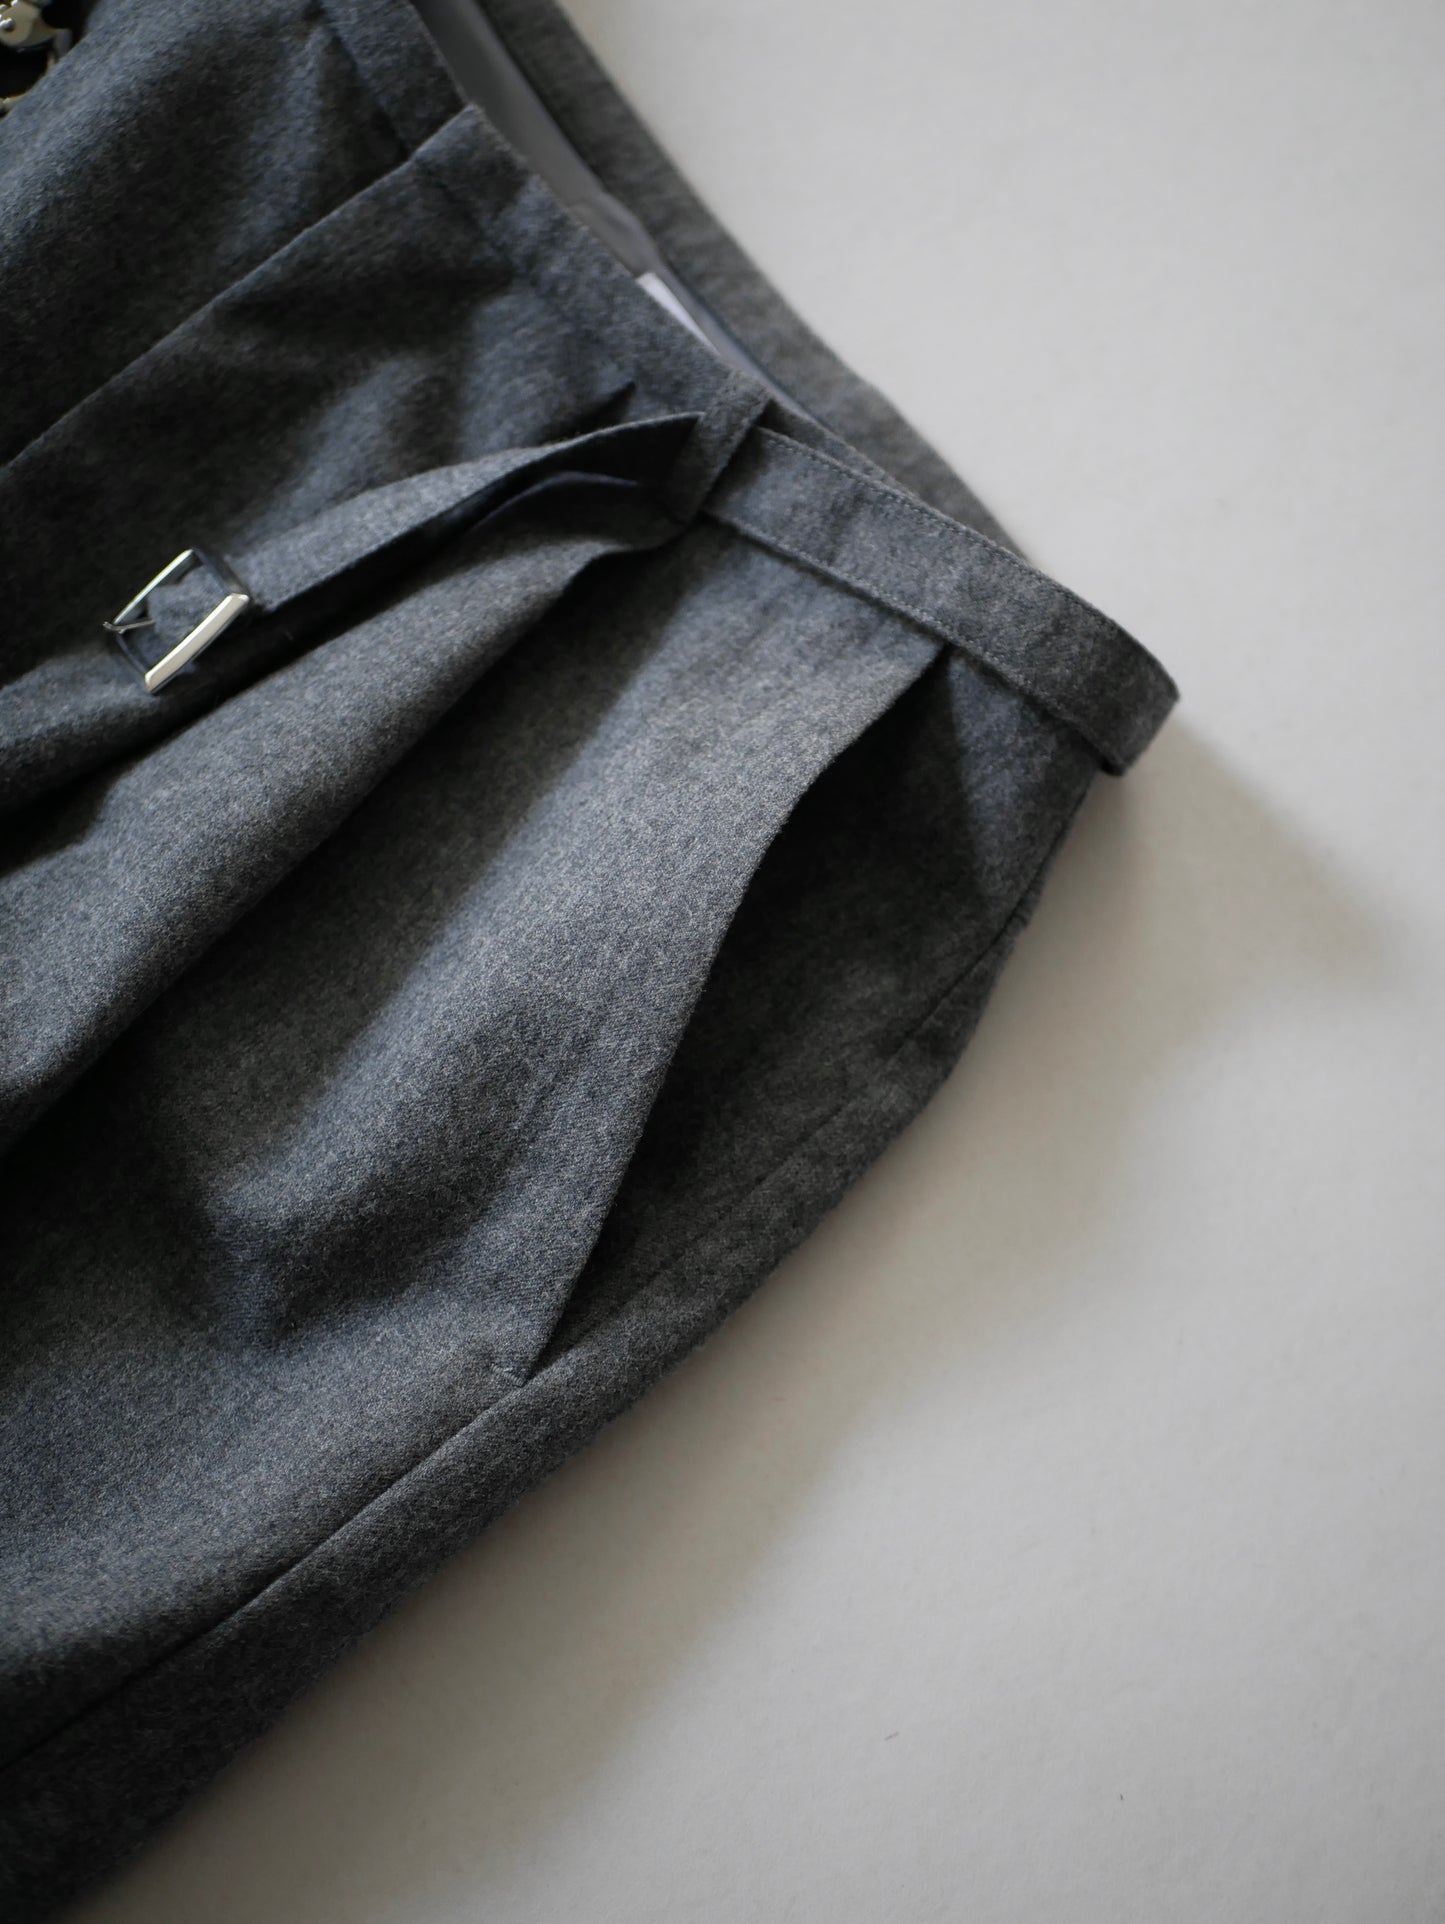 〔rich〕 Silver hook & shirring  pants 【Last one Gray size1 】